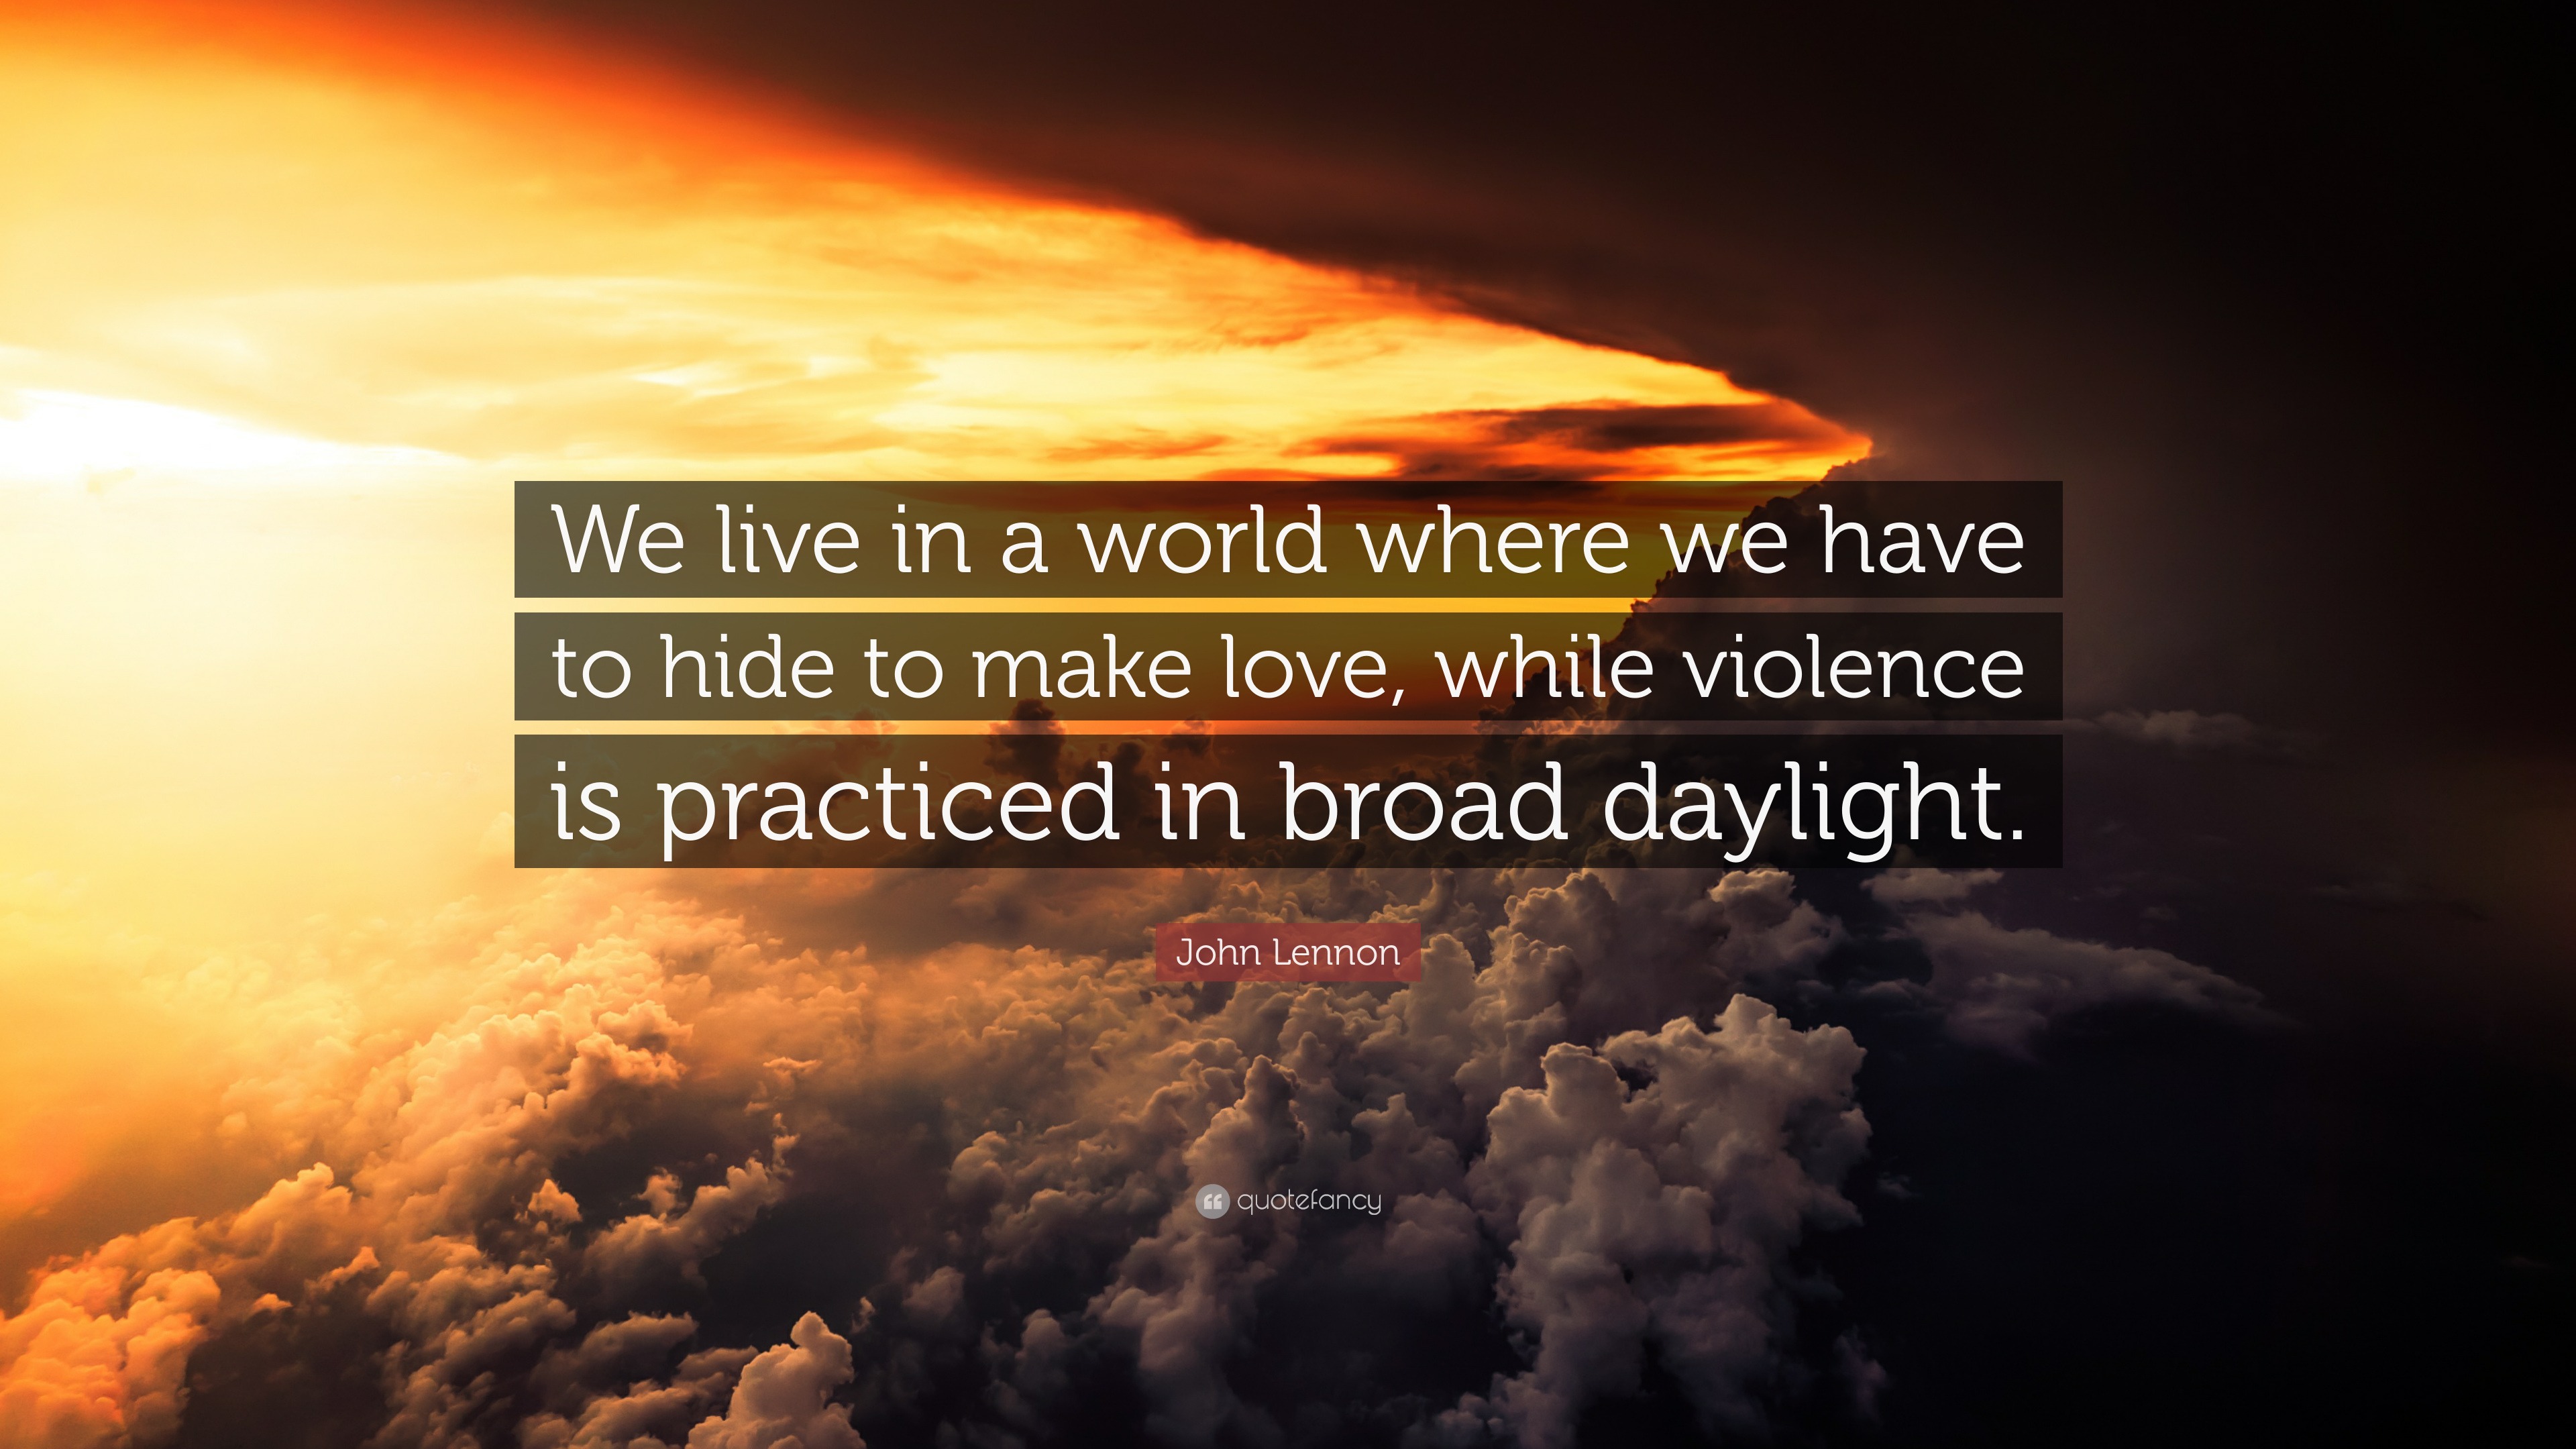 John Lennon Quote We live in a world where we have to hide to make